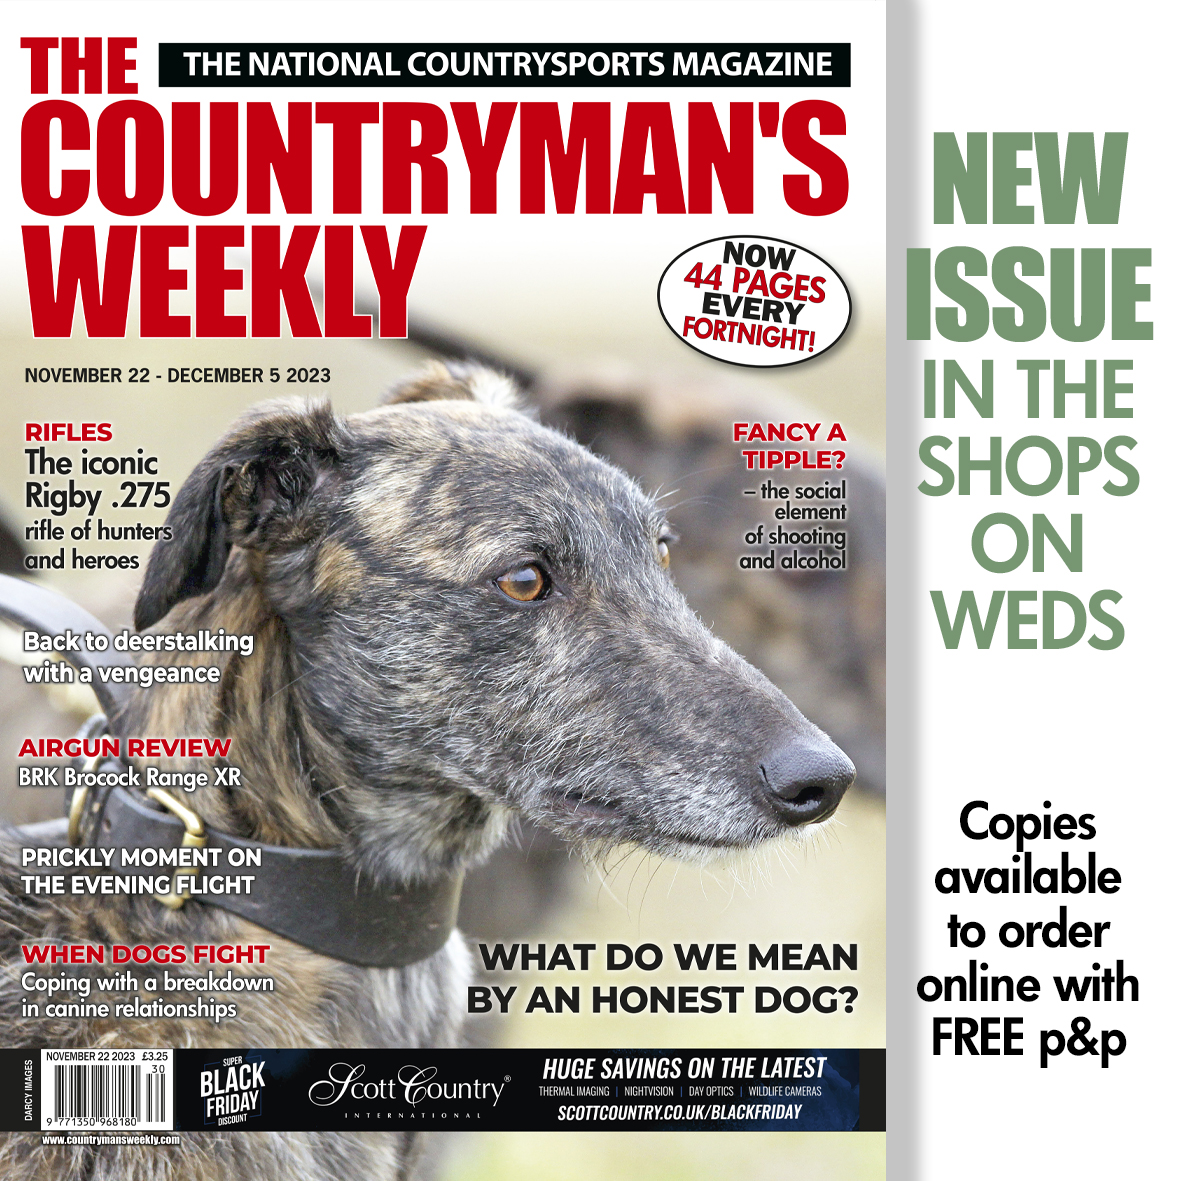 📷 OUT TOMORROW - the fresh new issue of The Countrymans Weekly - full of countrysports, country life, news and advice. Copies available to order from shop.countrymansweekly.com/issue/view/iss… - with free p&p #countrylife #rurallife #countrysports #countryliving